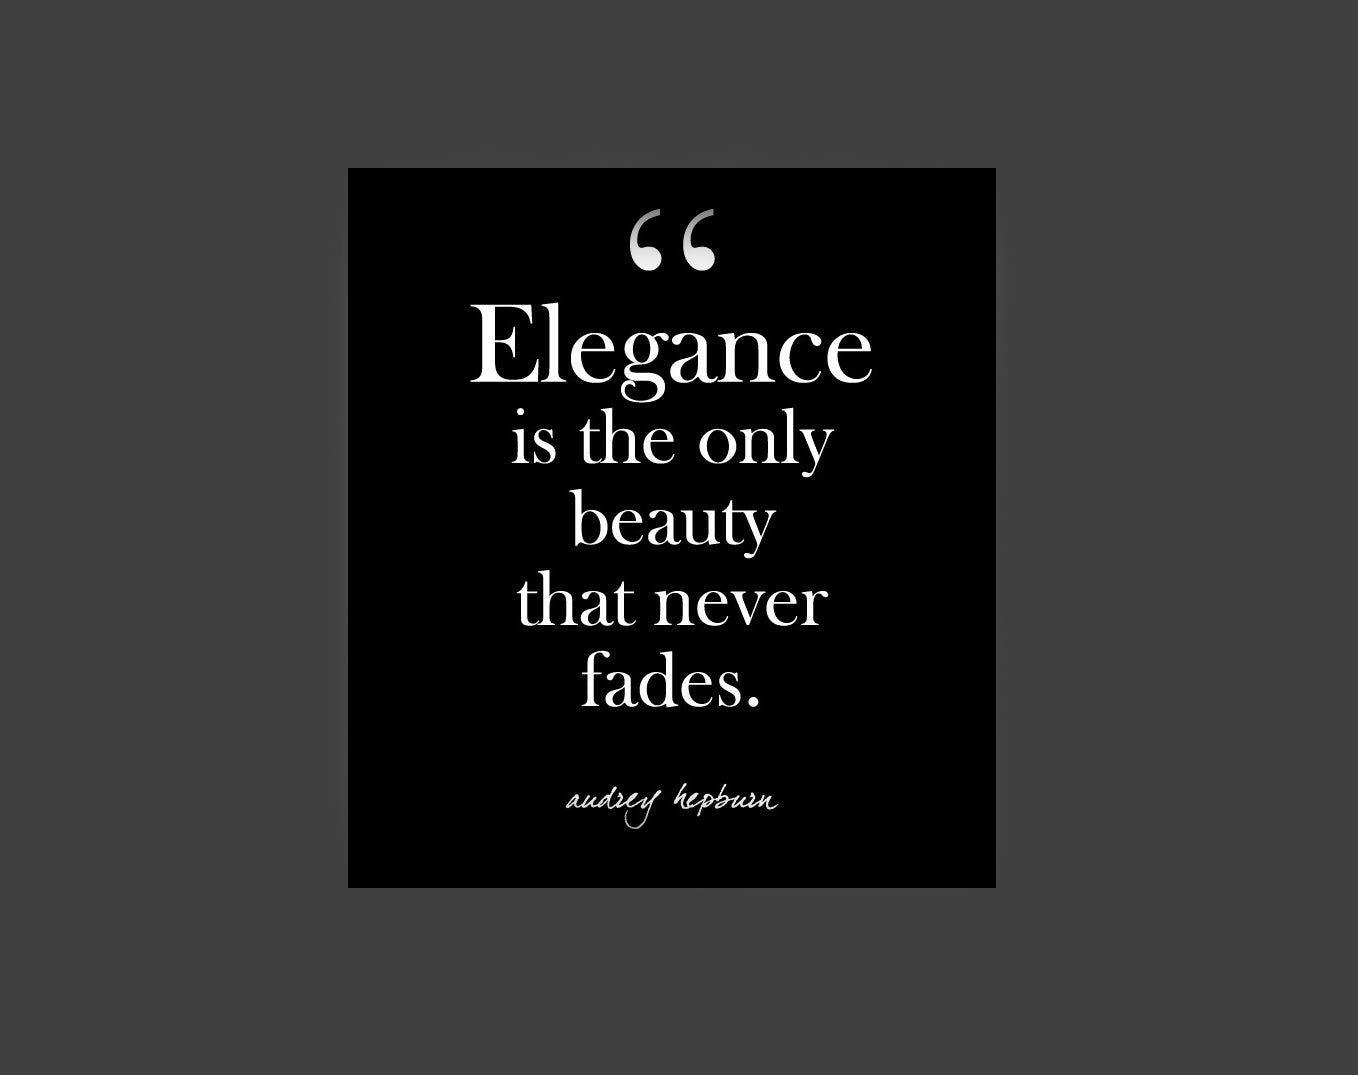 Famous Audrey Hepburn Quotes: Elegance is the Only Beauty that Never Fades - DSF Antique Jewelry